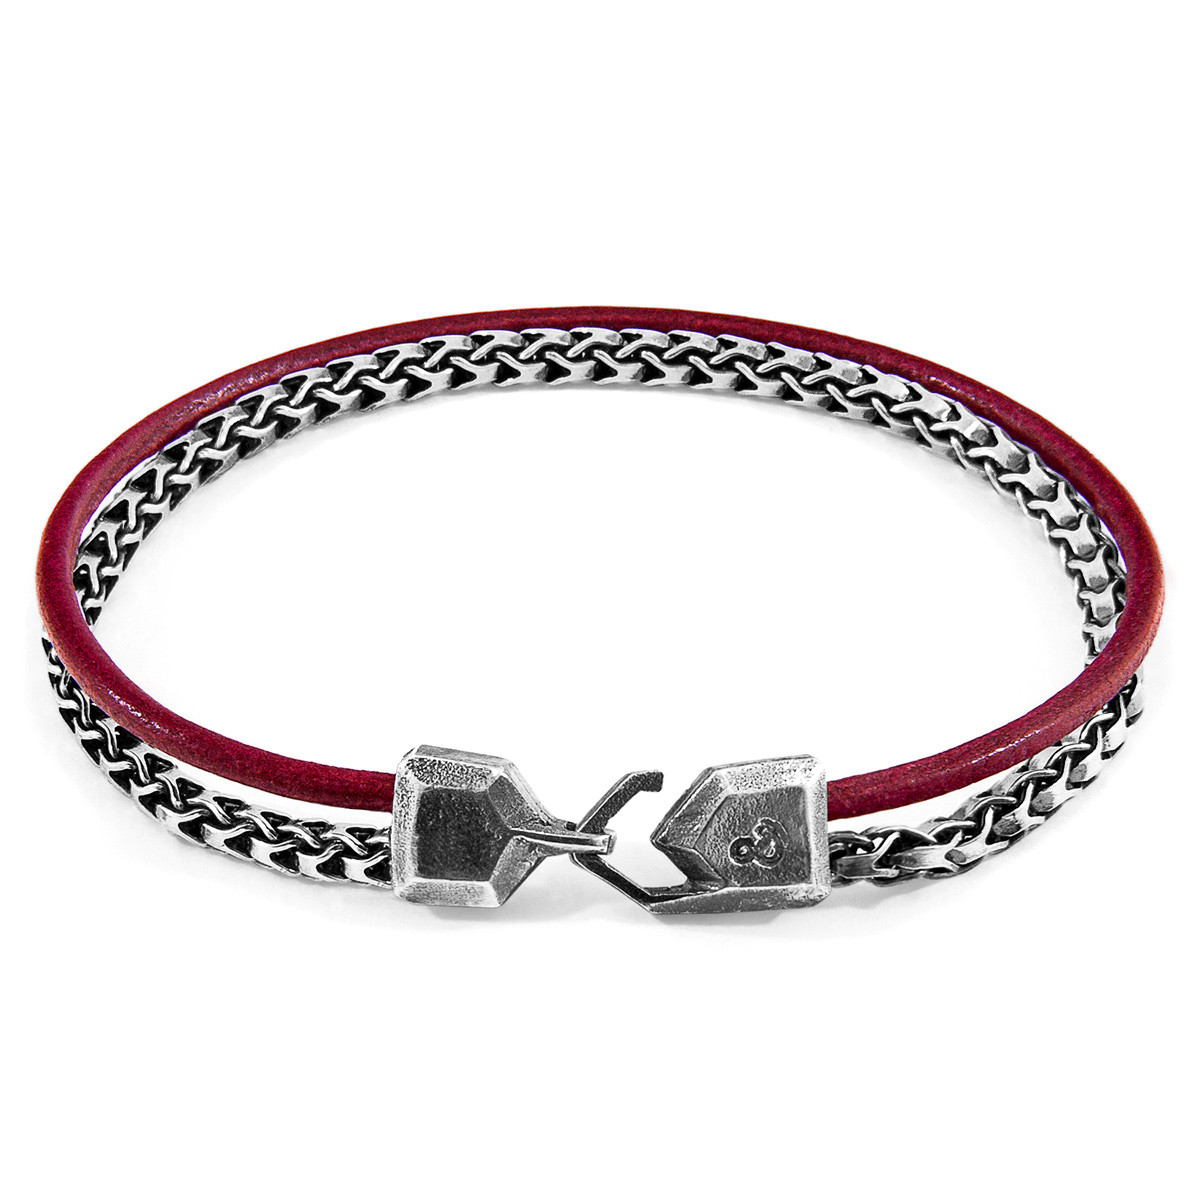 Anchor & Crew Bordeaux Red Bowspirit Mast Silver and Round Leather Bracelet 